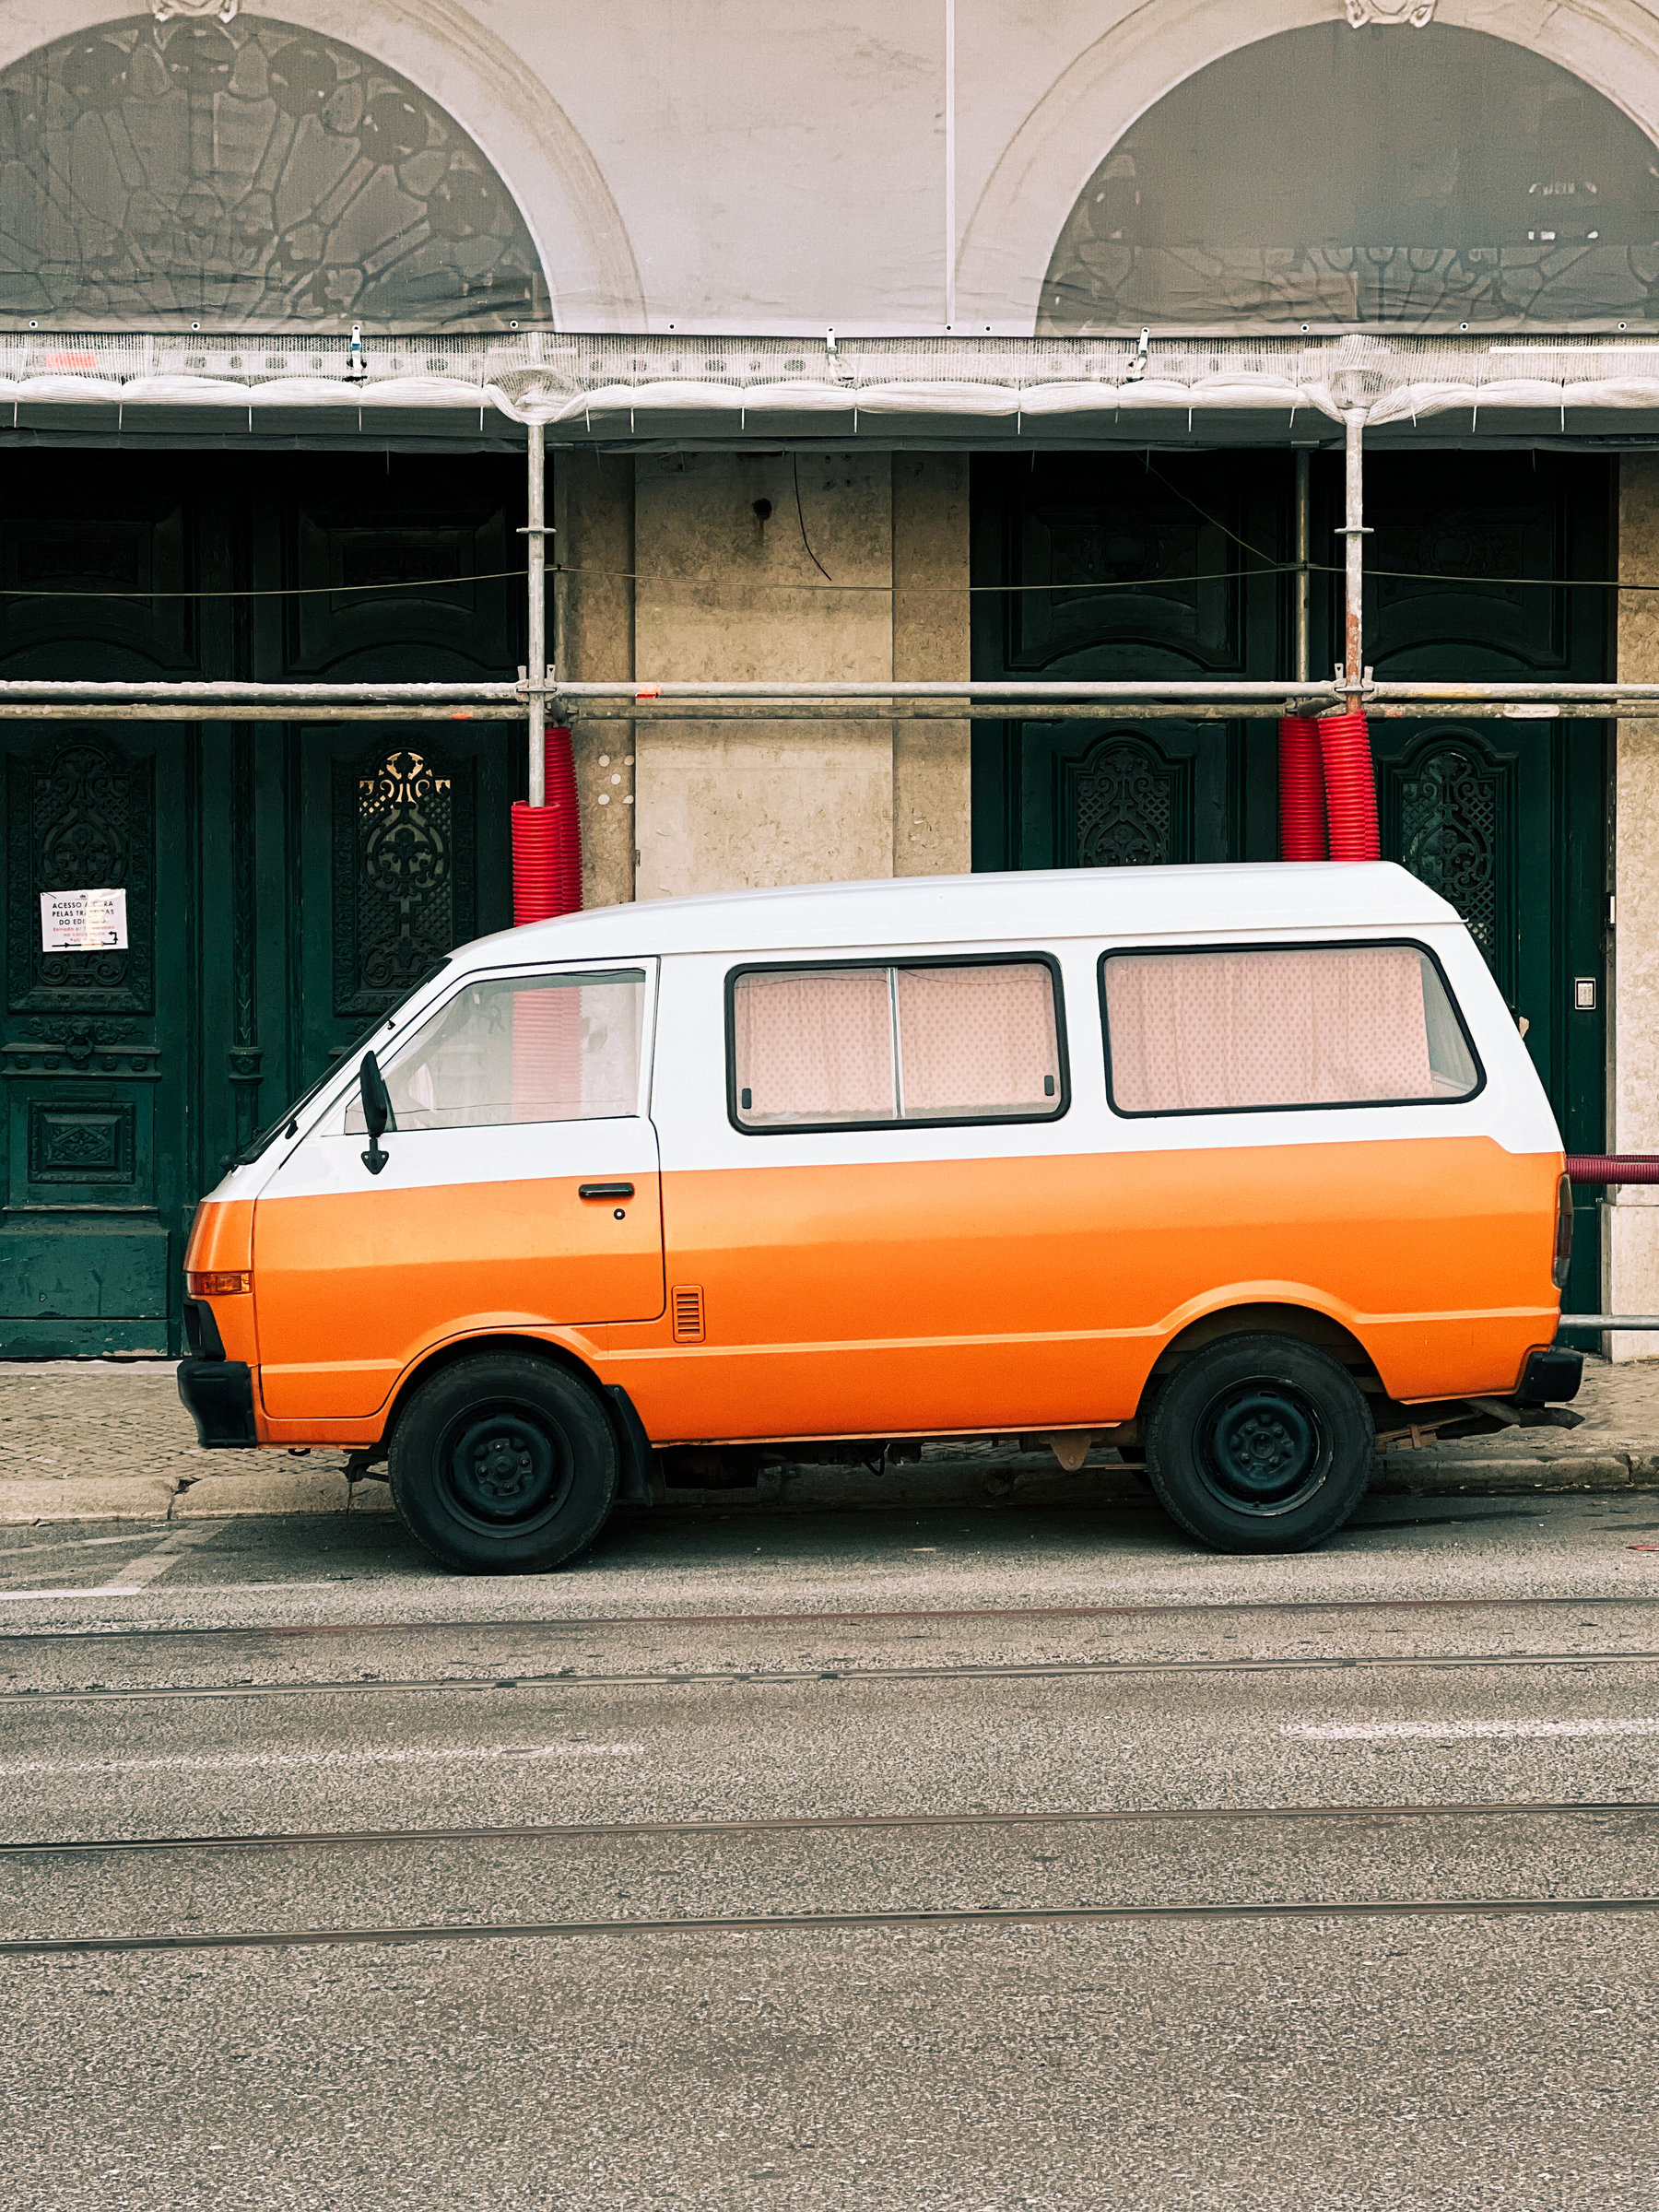 An orange and white van, parked in front of a building undergoing renovation.